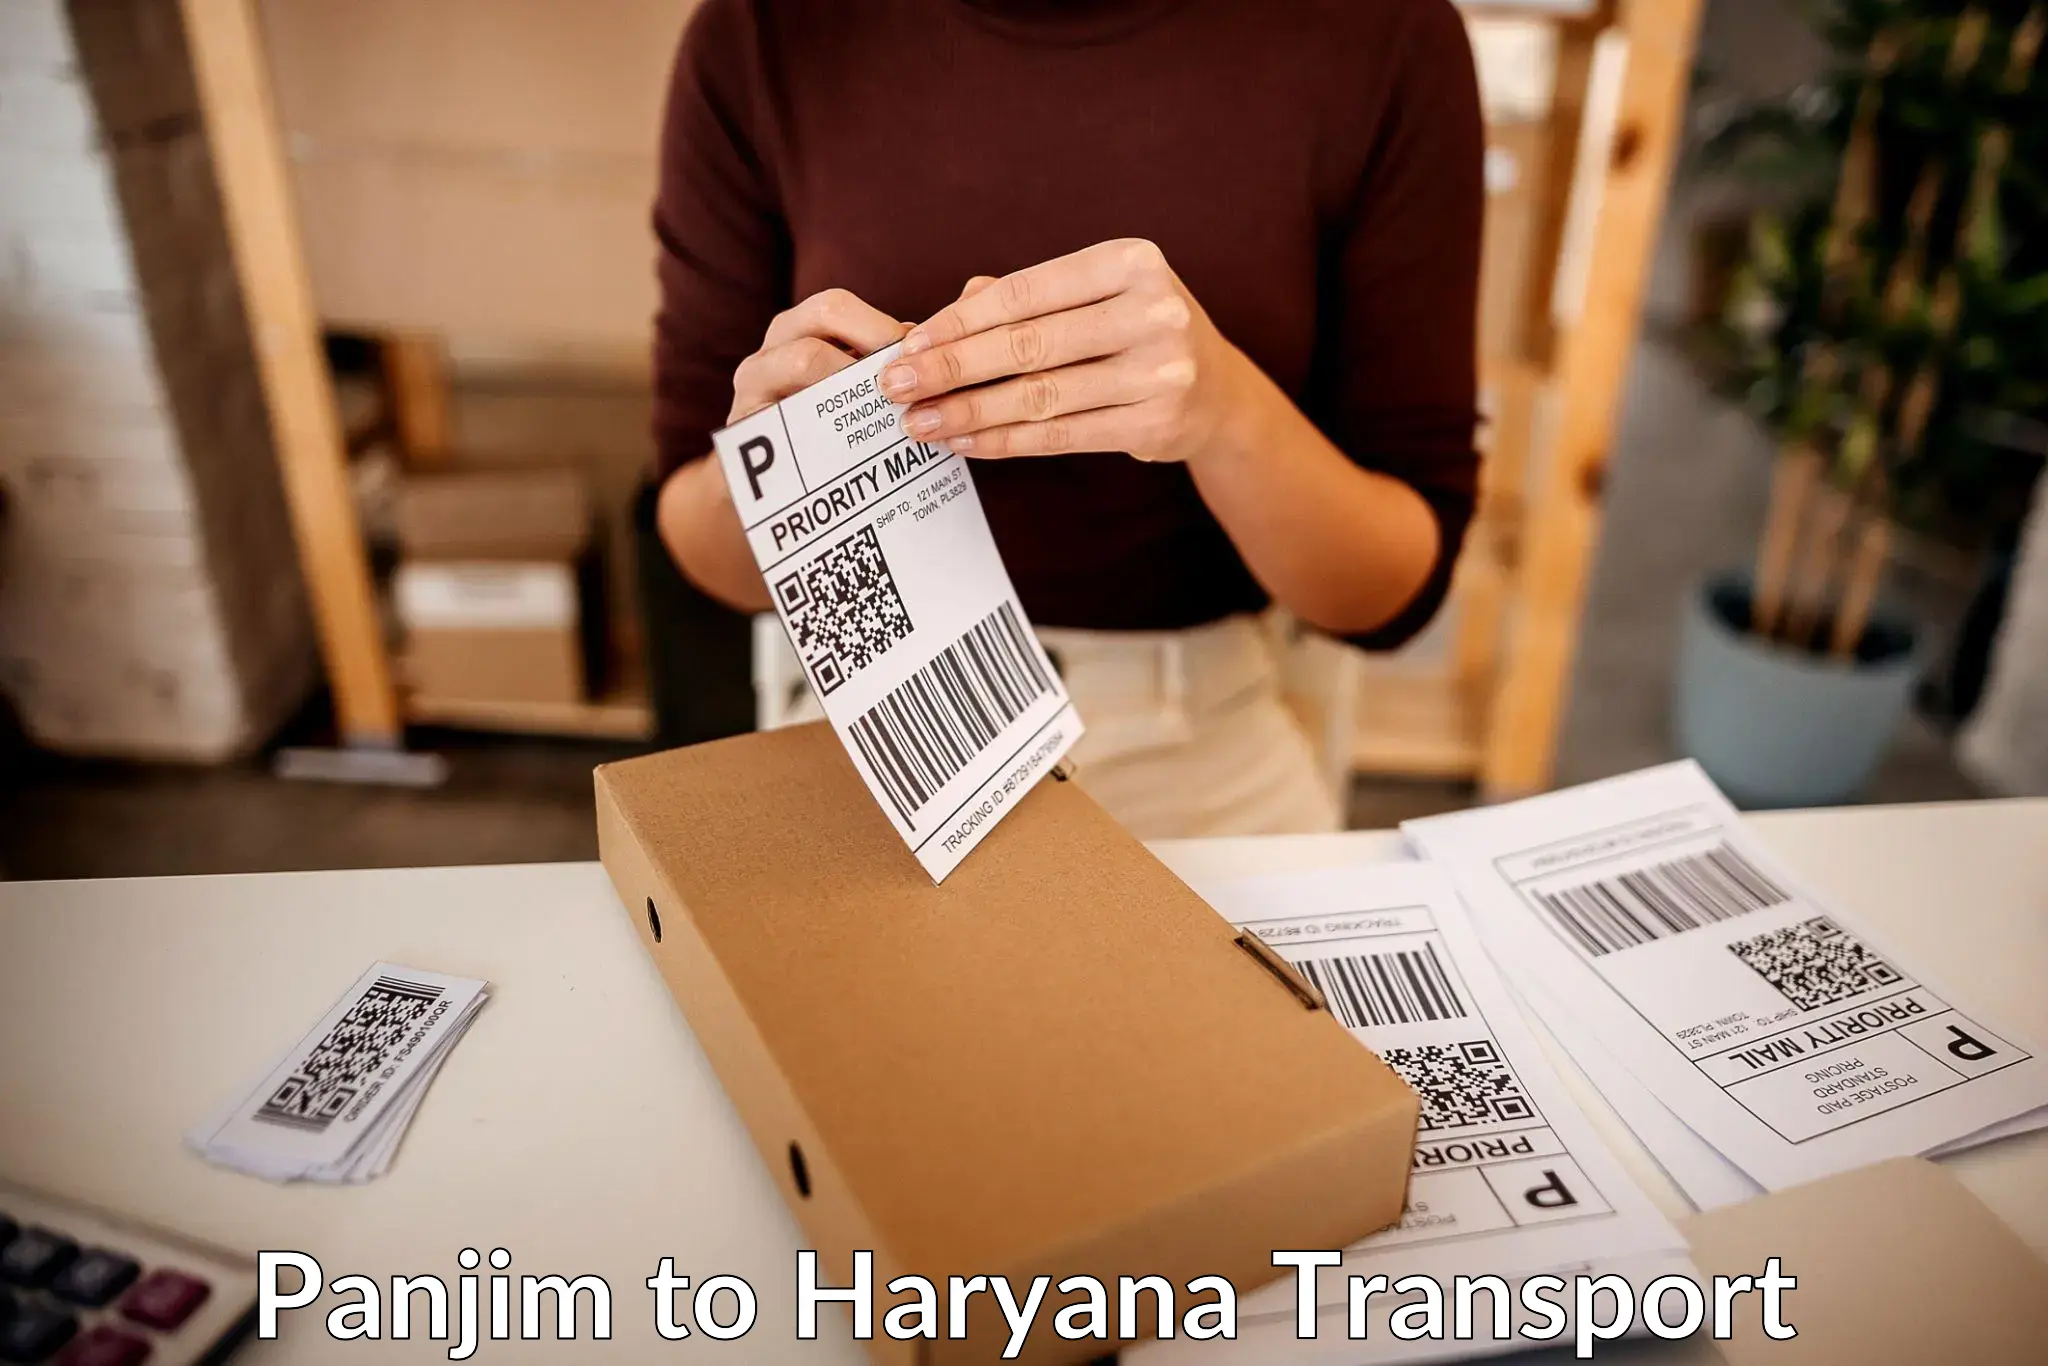 Air freight transport services in Panjim to NCR Haryana